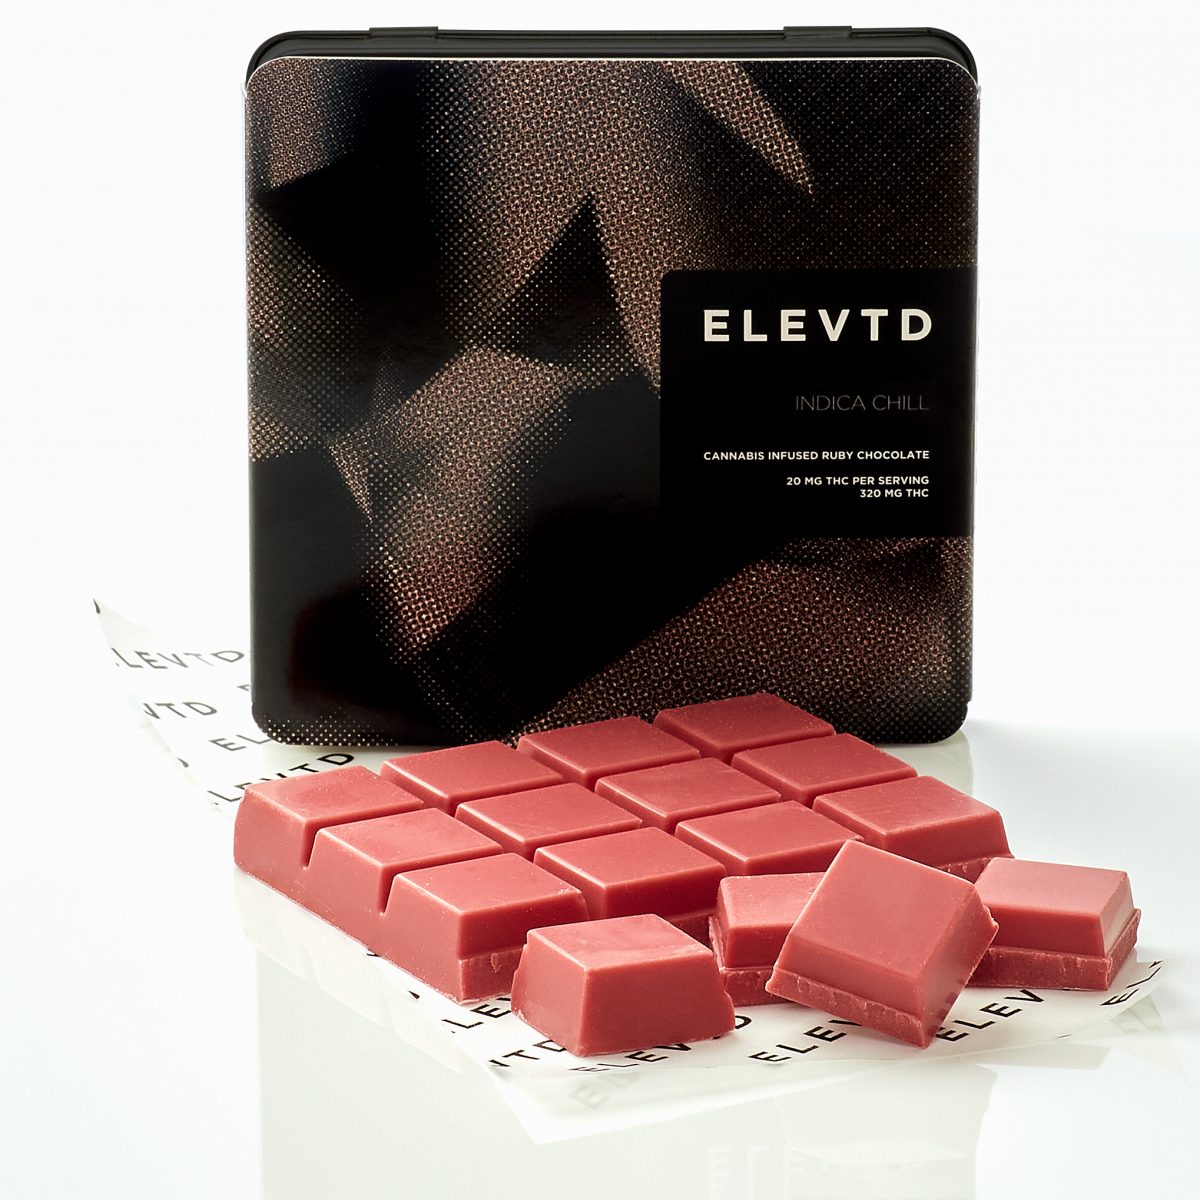 ELEVATED Cannabis Infused Chocolate